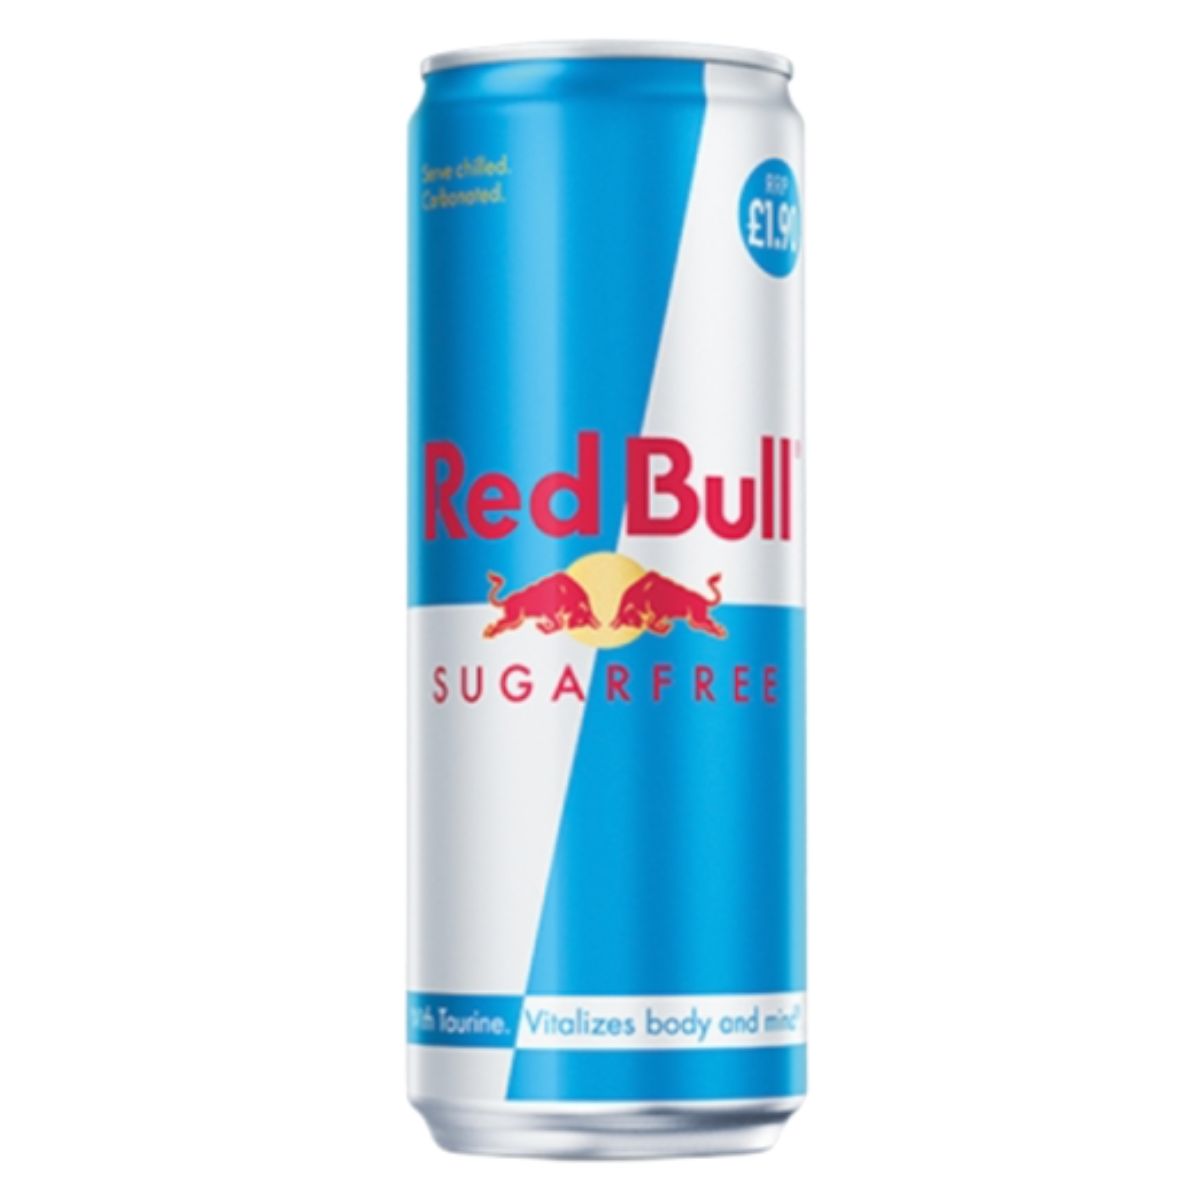 A can of Red Bull - Sugar Free Energy Drink - 355ml, featuring the iconic blue and silver design with red bulls charging against each other.